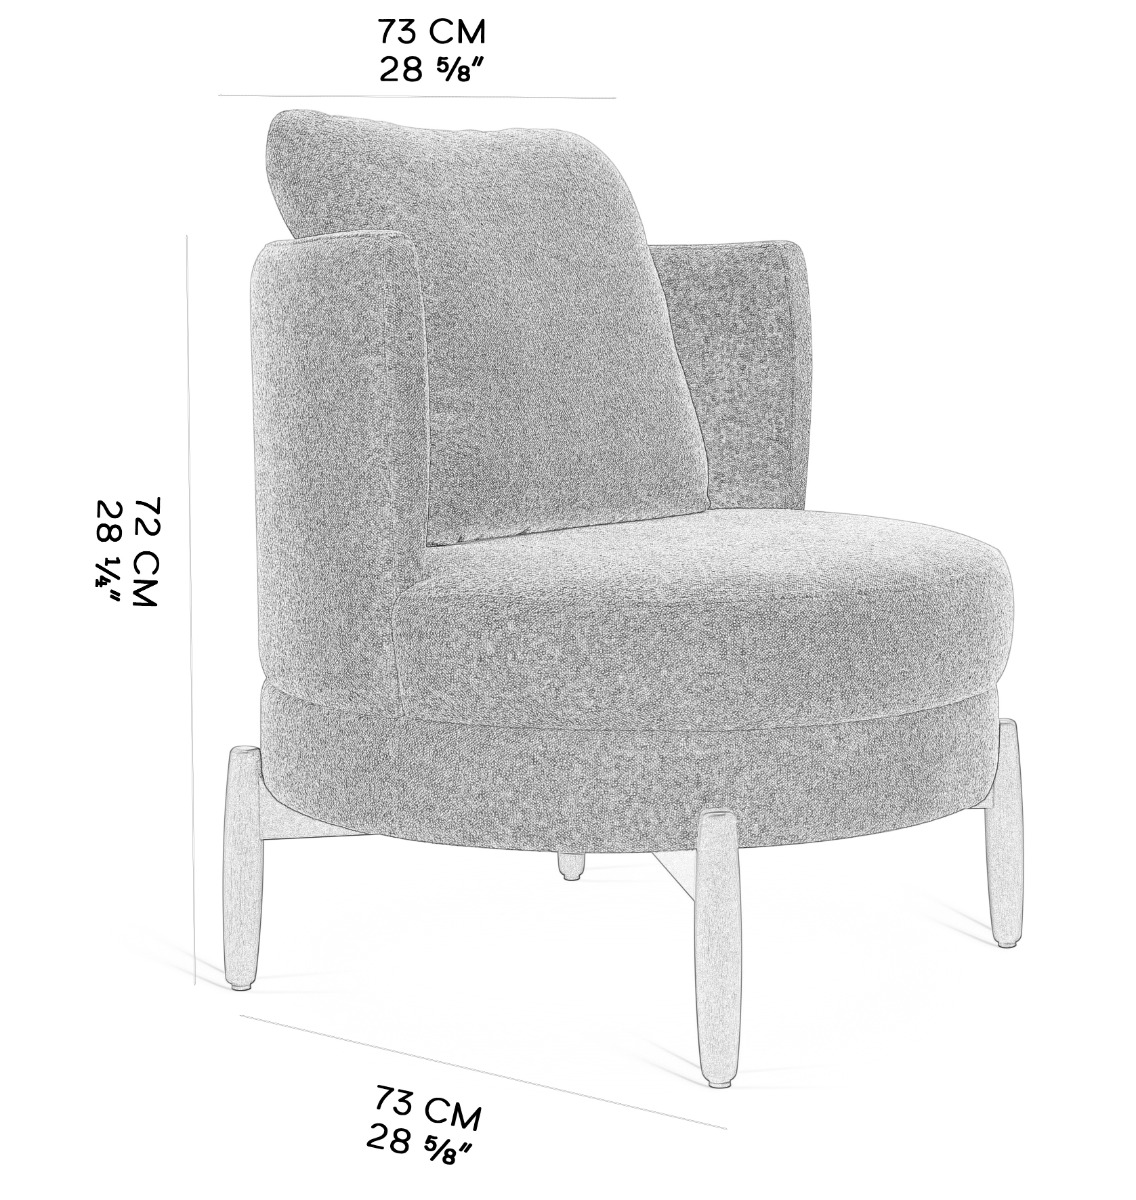 HALO CHAIR - SWIVEL OR FIXED BASE